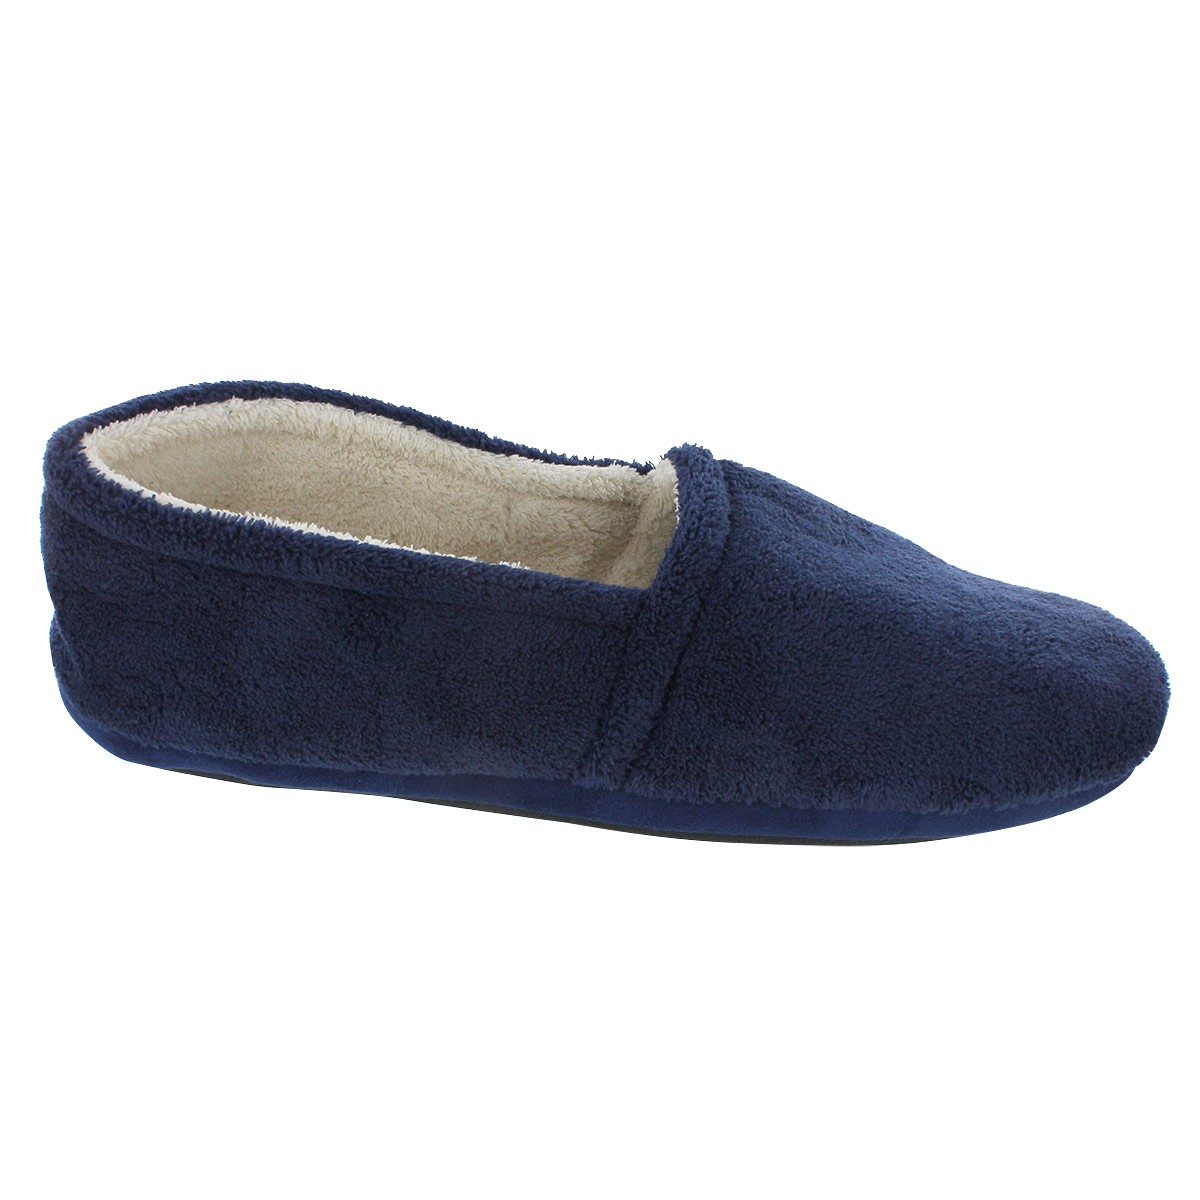 Rugged Blue Soft Fleece Lined Slippers Navy Size 8